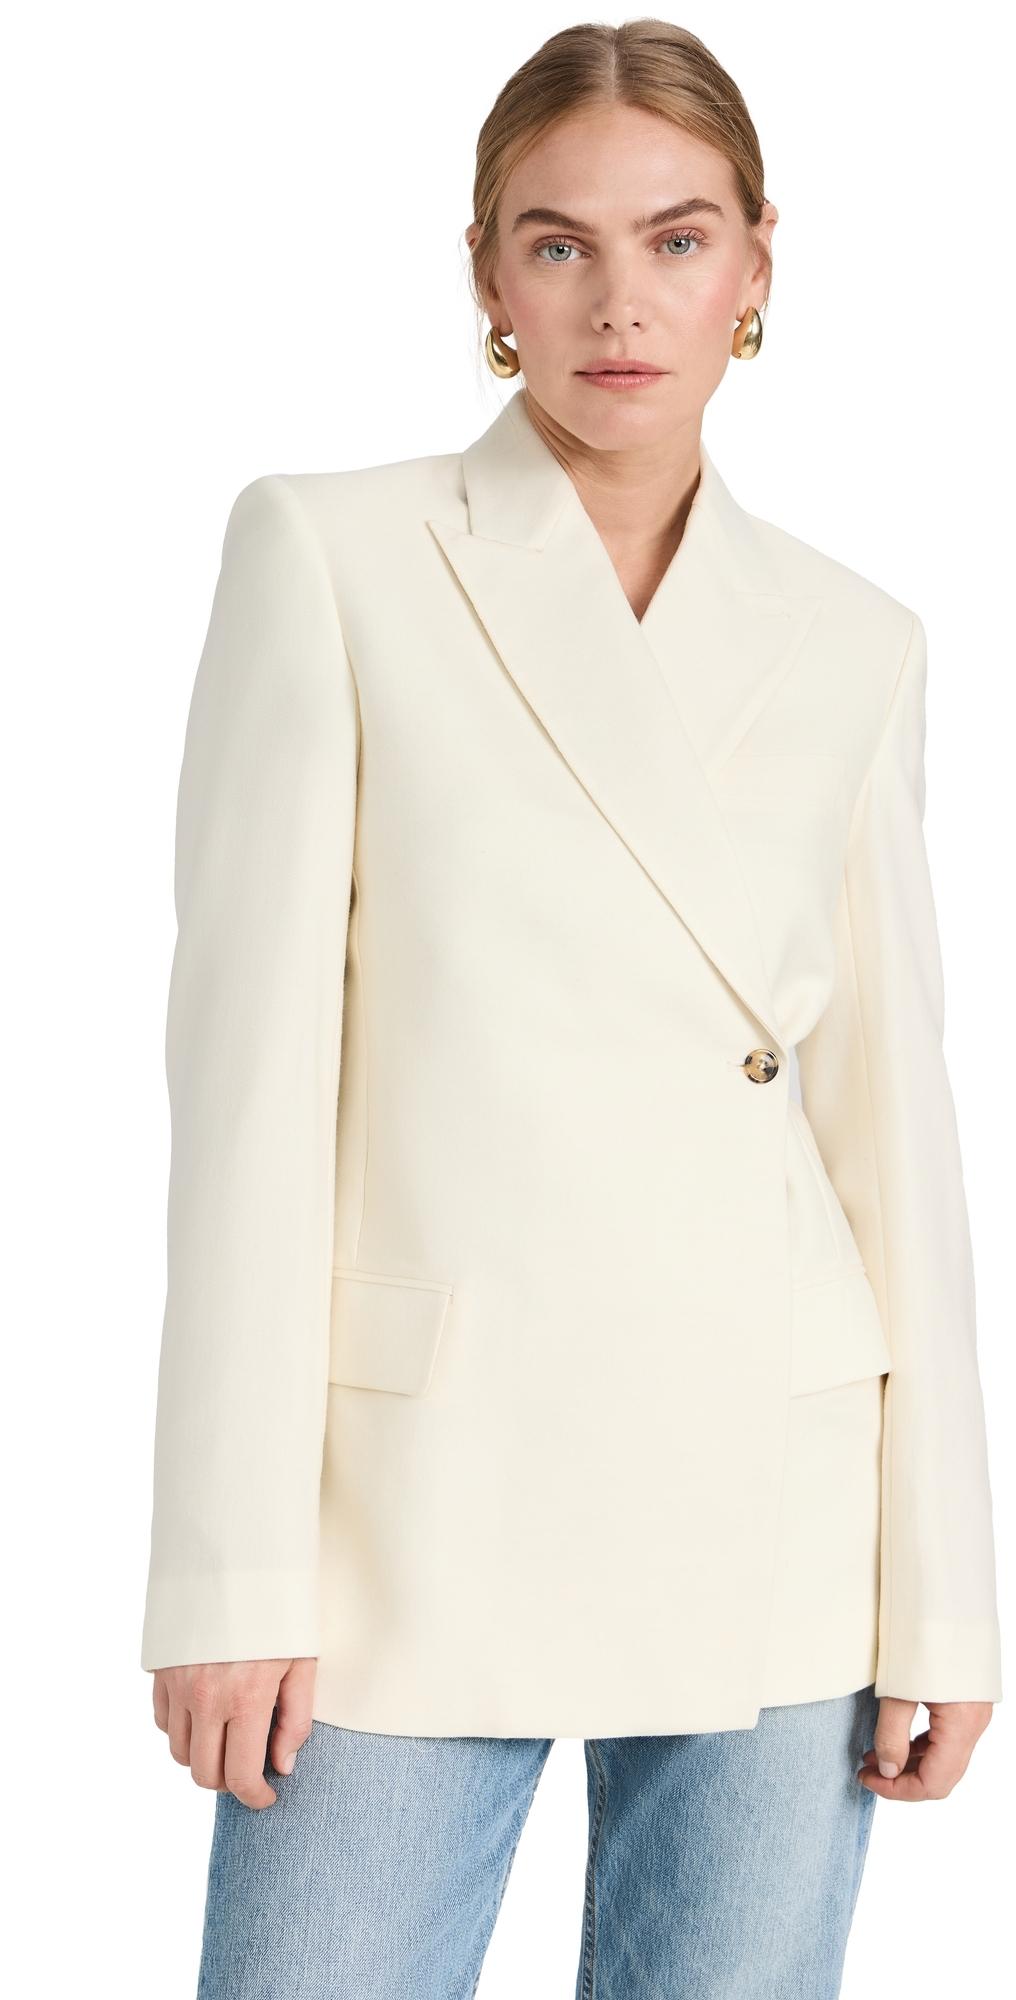 Interior The Man's Suit Jacket in Natural | Lyst